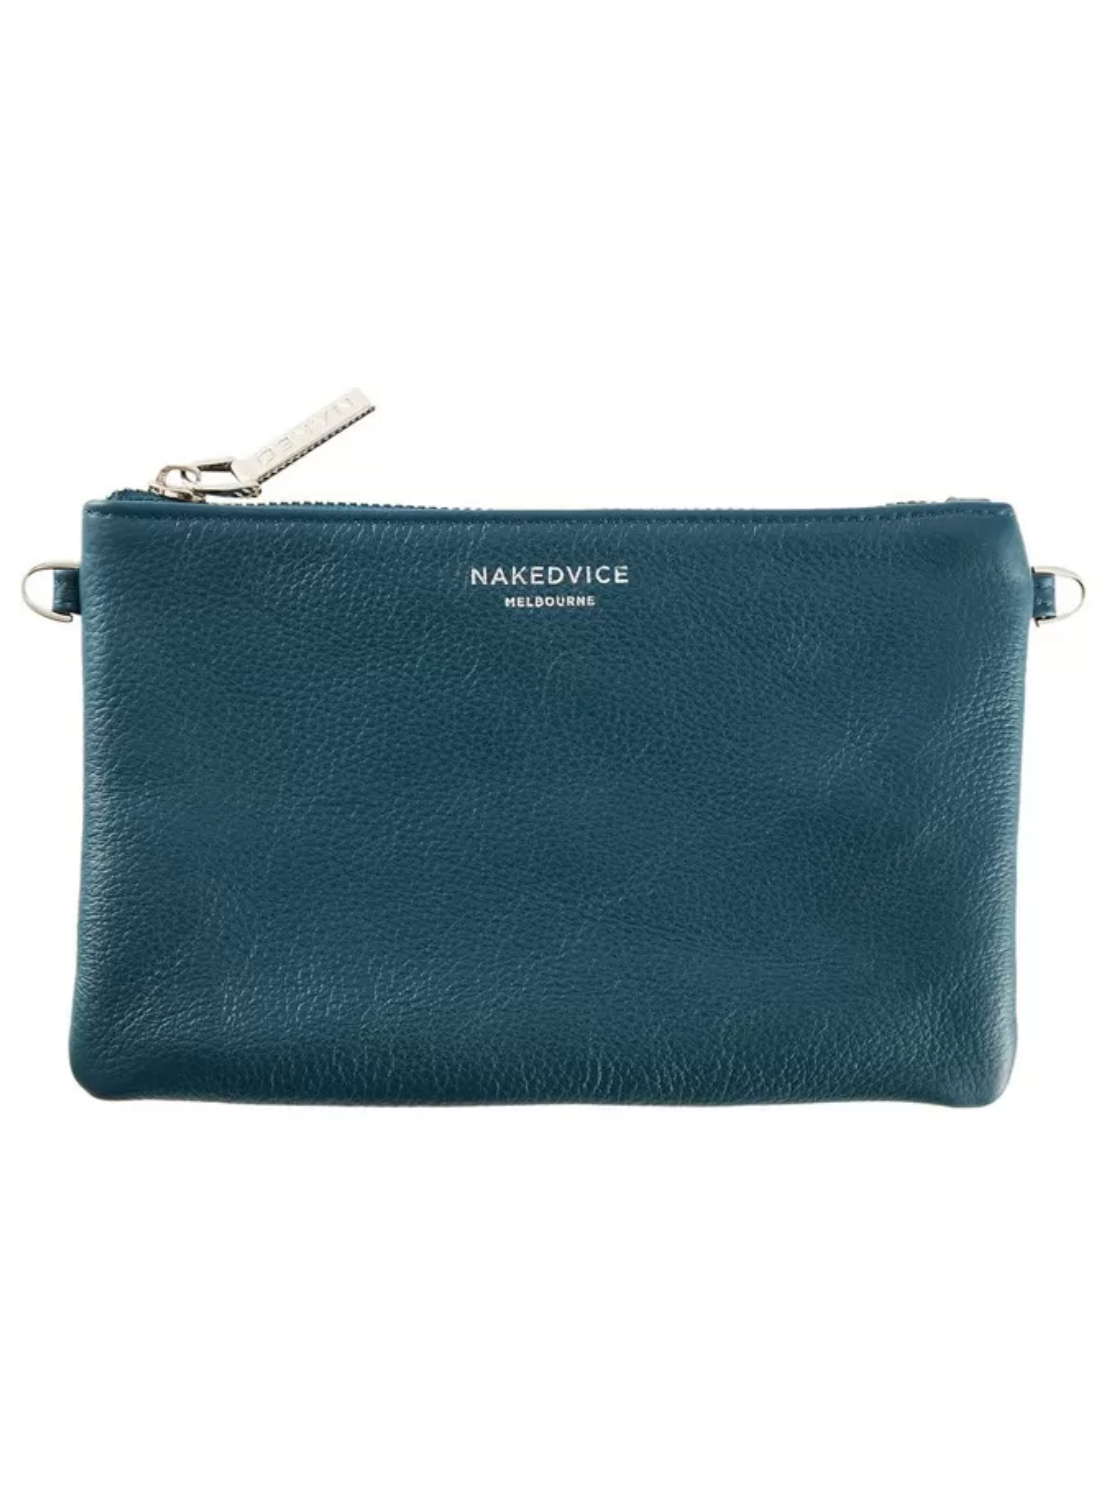 The Ari Pouch - Teal